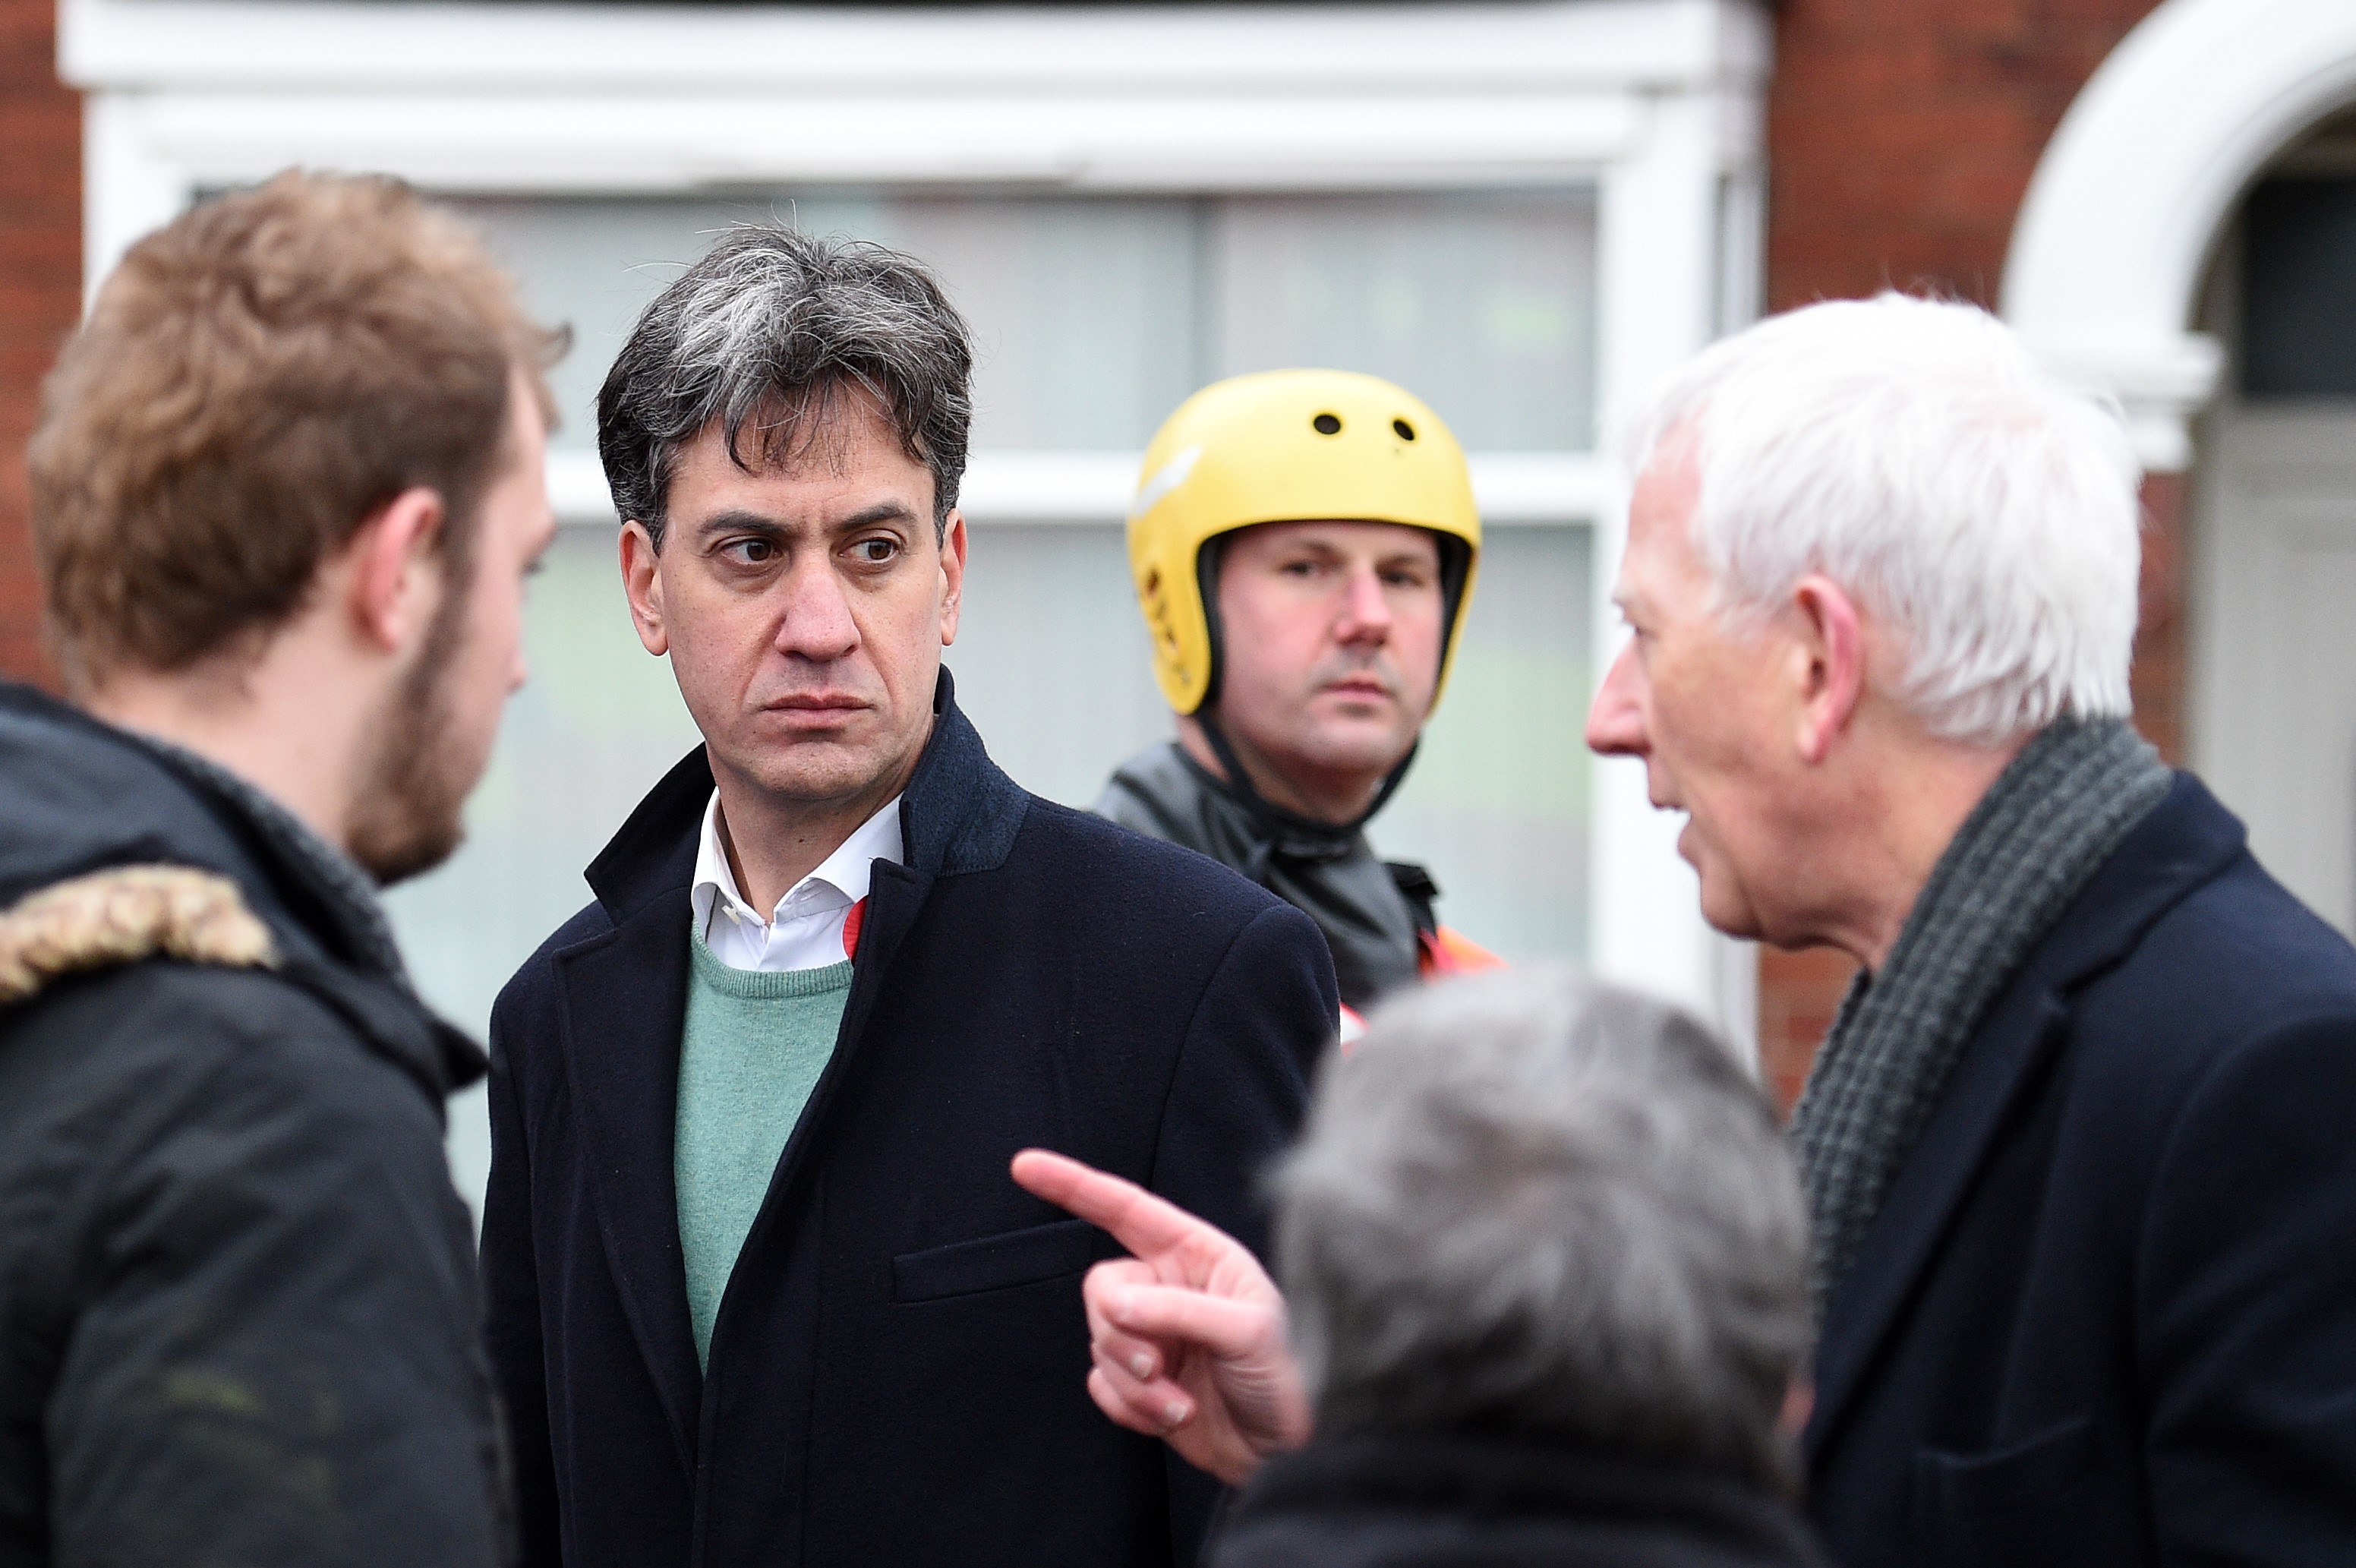 Labour MP for Doncaster North, Ed Miliband (2L), talks with residents on a flooded street in Doncaster, northern England on November 8, 2019,